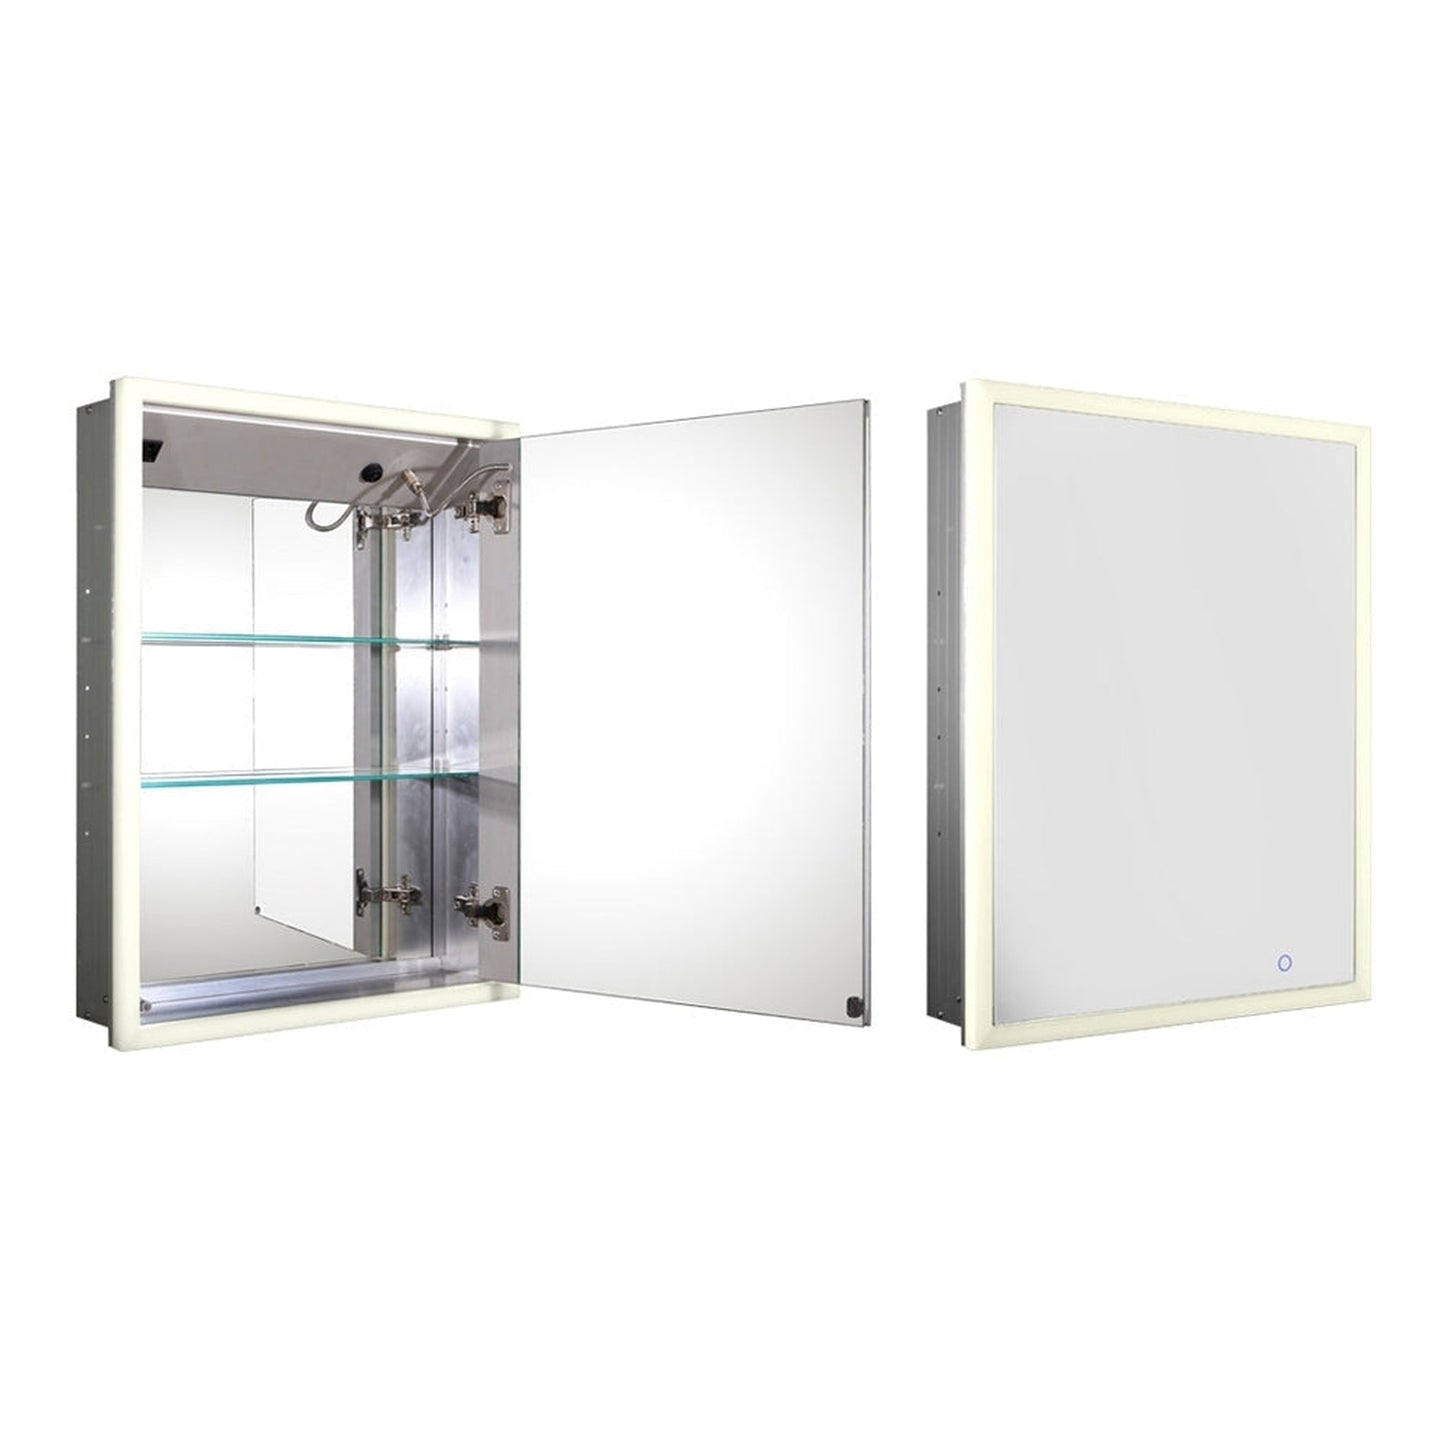 Whitehaus Medicinehaus WHLUN7055-IR Recessed Single Mirrored Door Medicine Cabinet With Outlet, Defogger, LED Power Button and Dimmer for Light